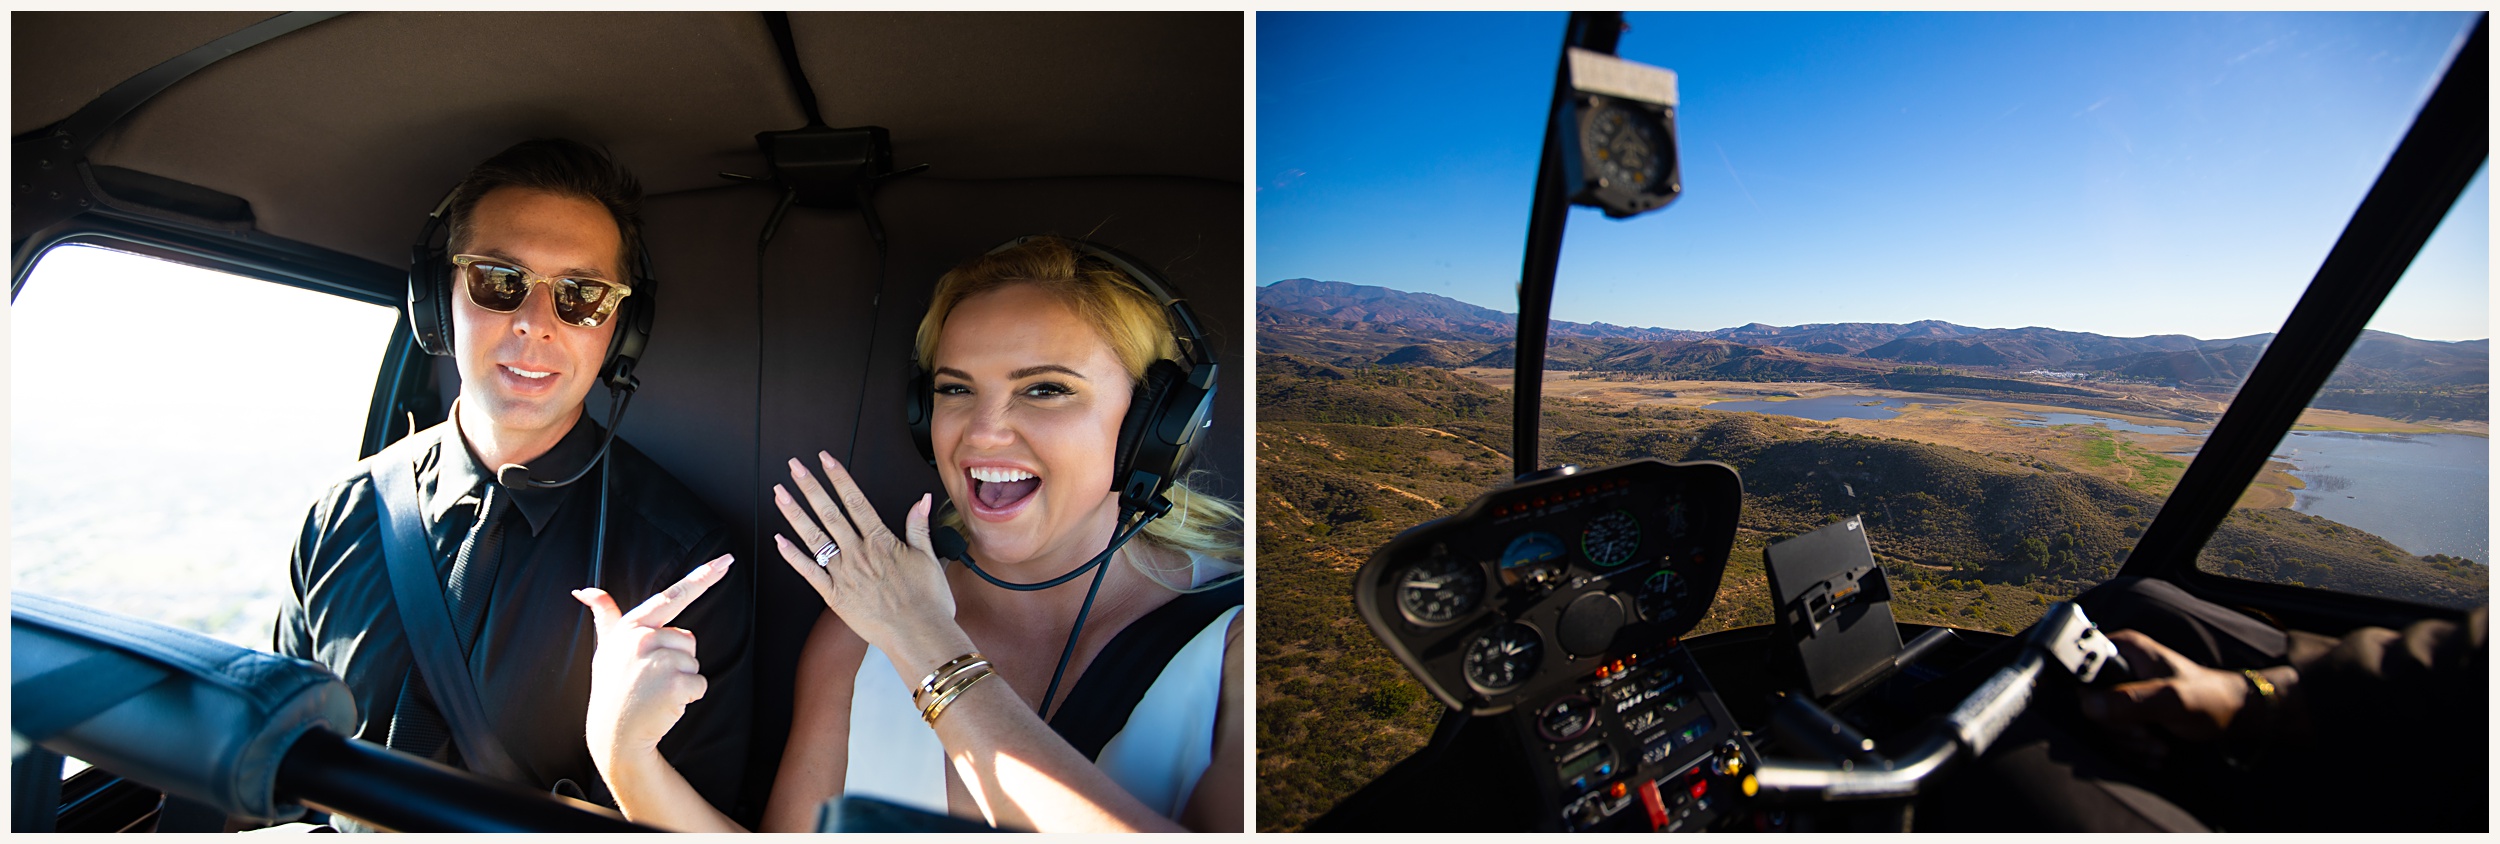 Photo of bride and groom in helicopter, bride pointing at her wedding ring finger